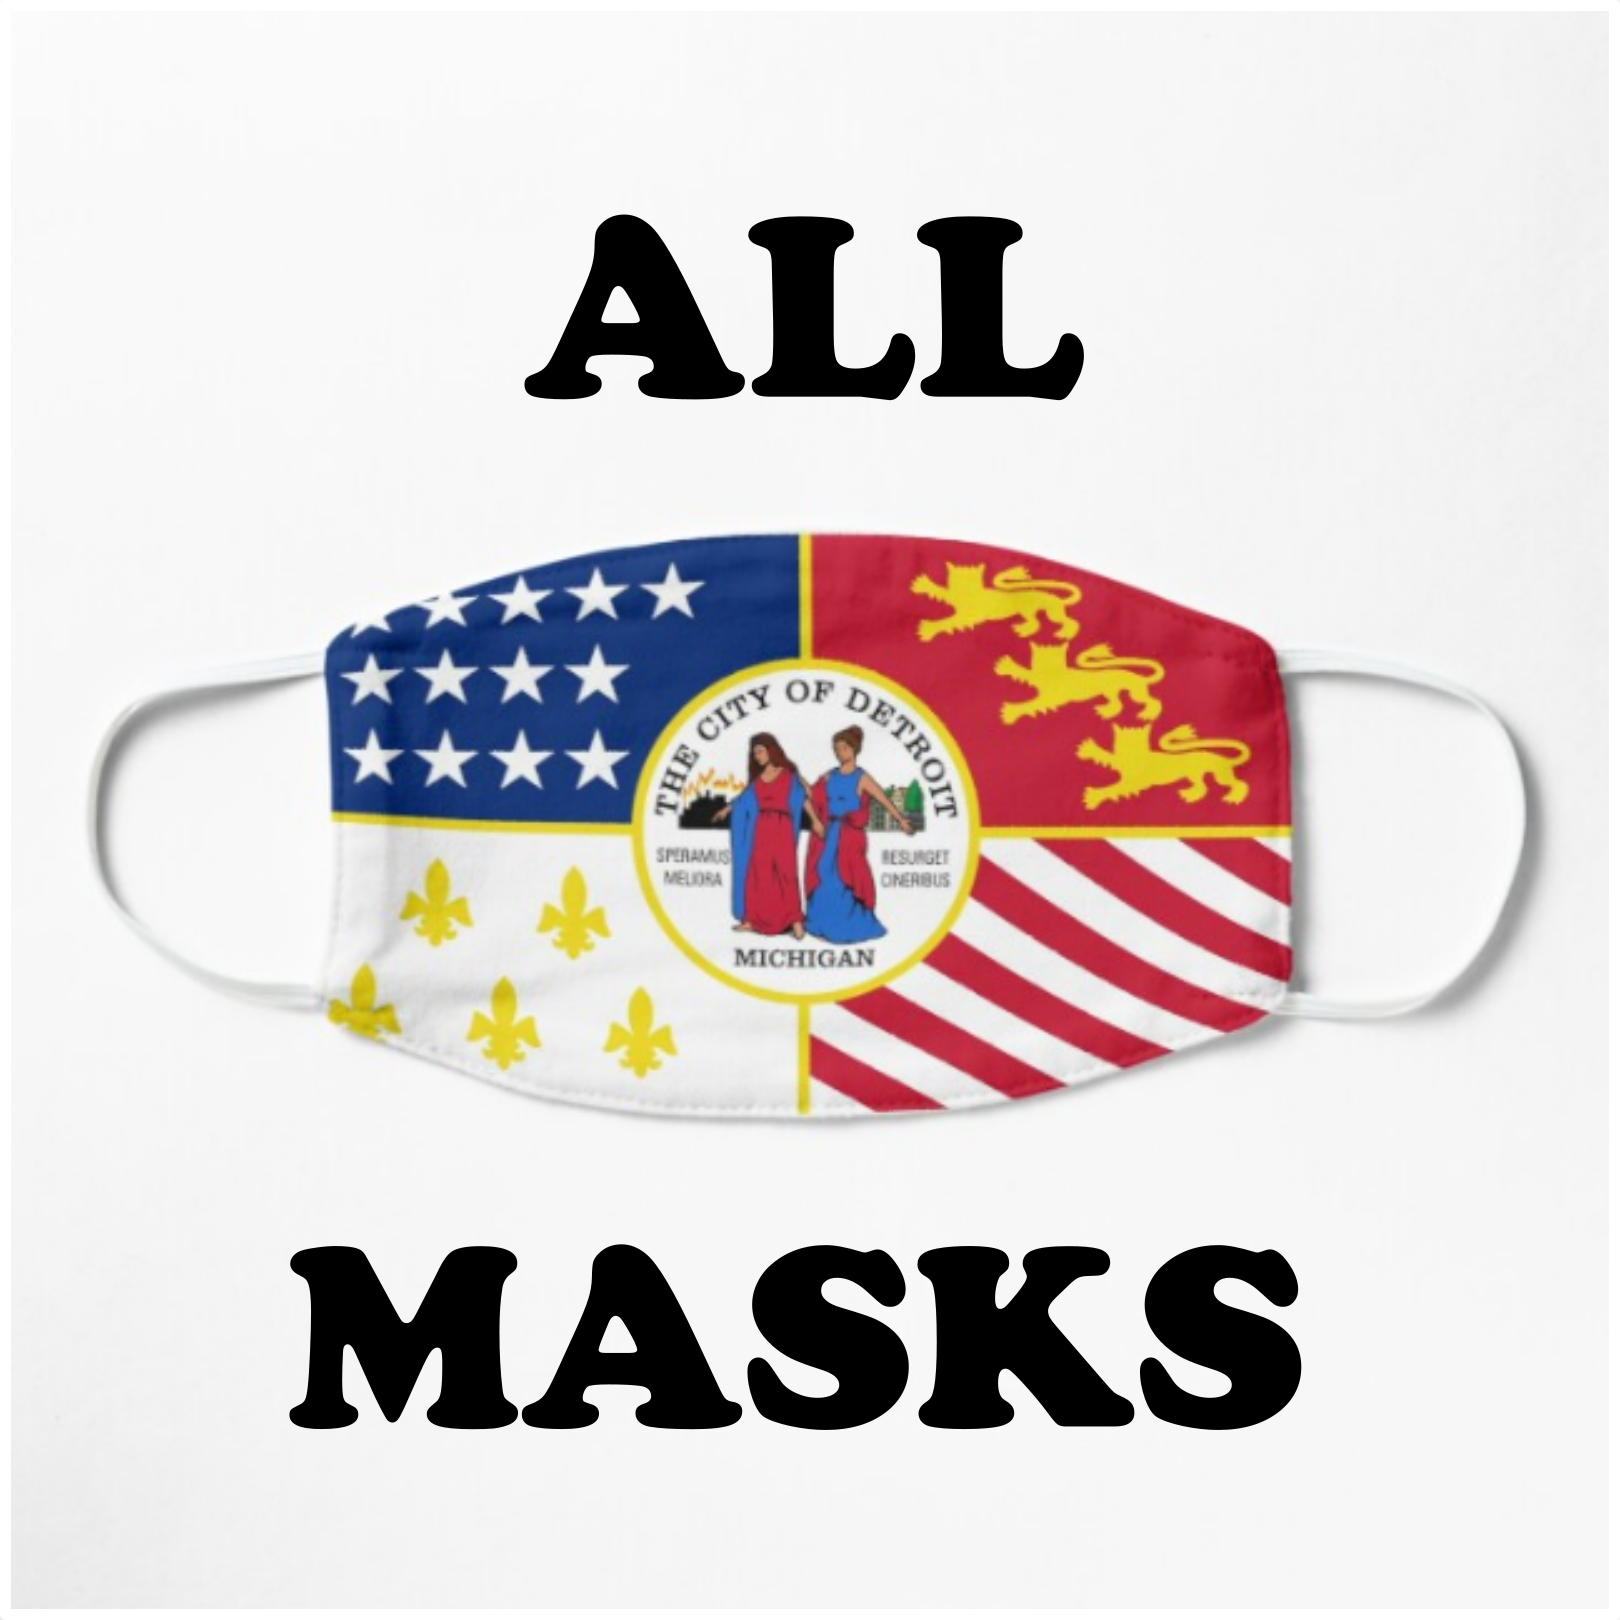 ALL MASKS.png